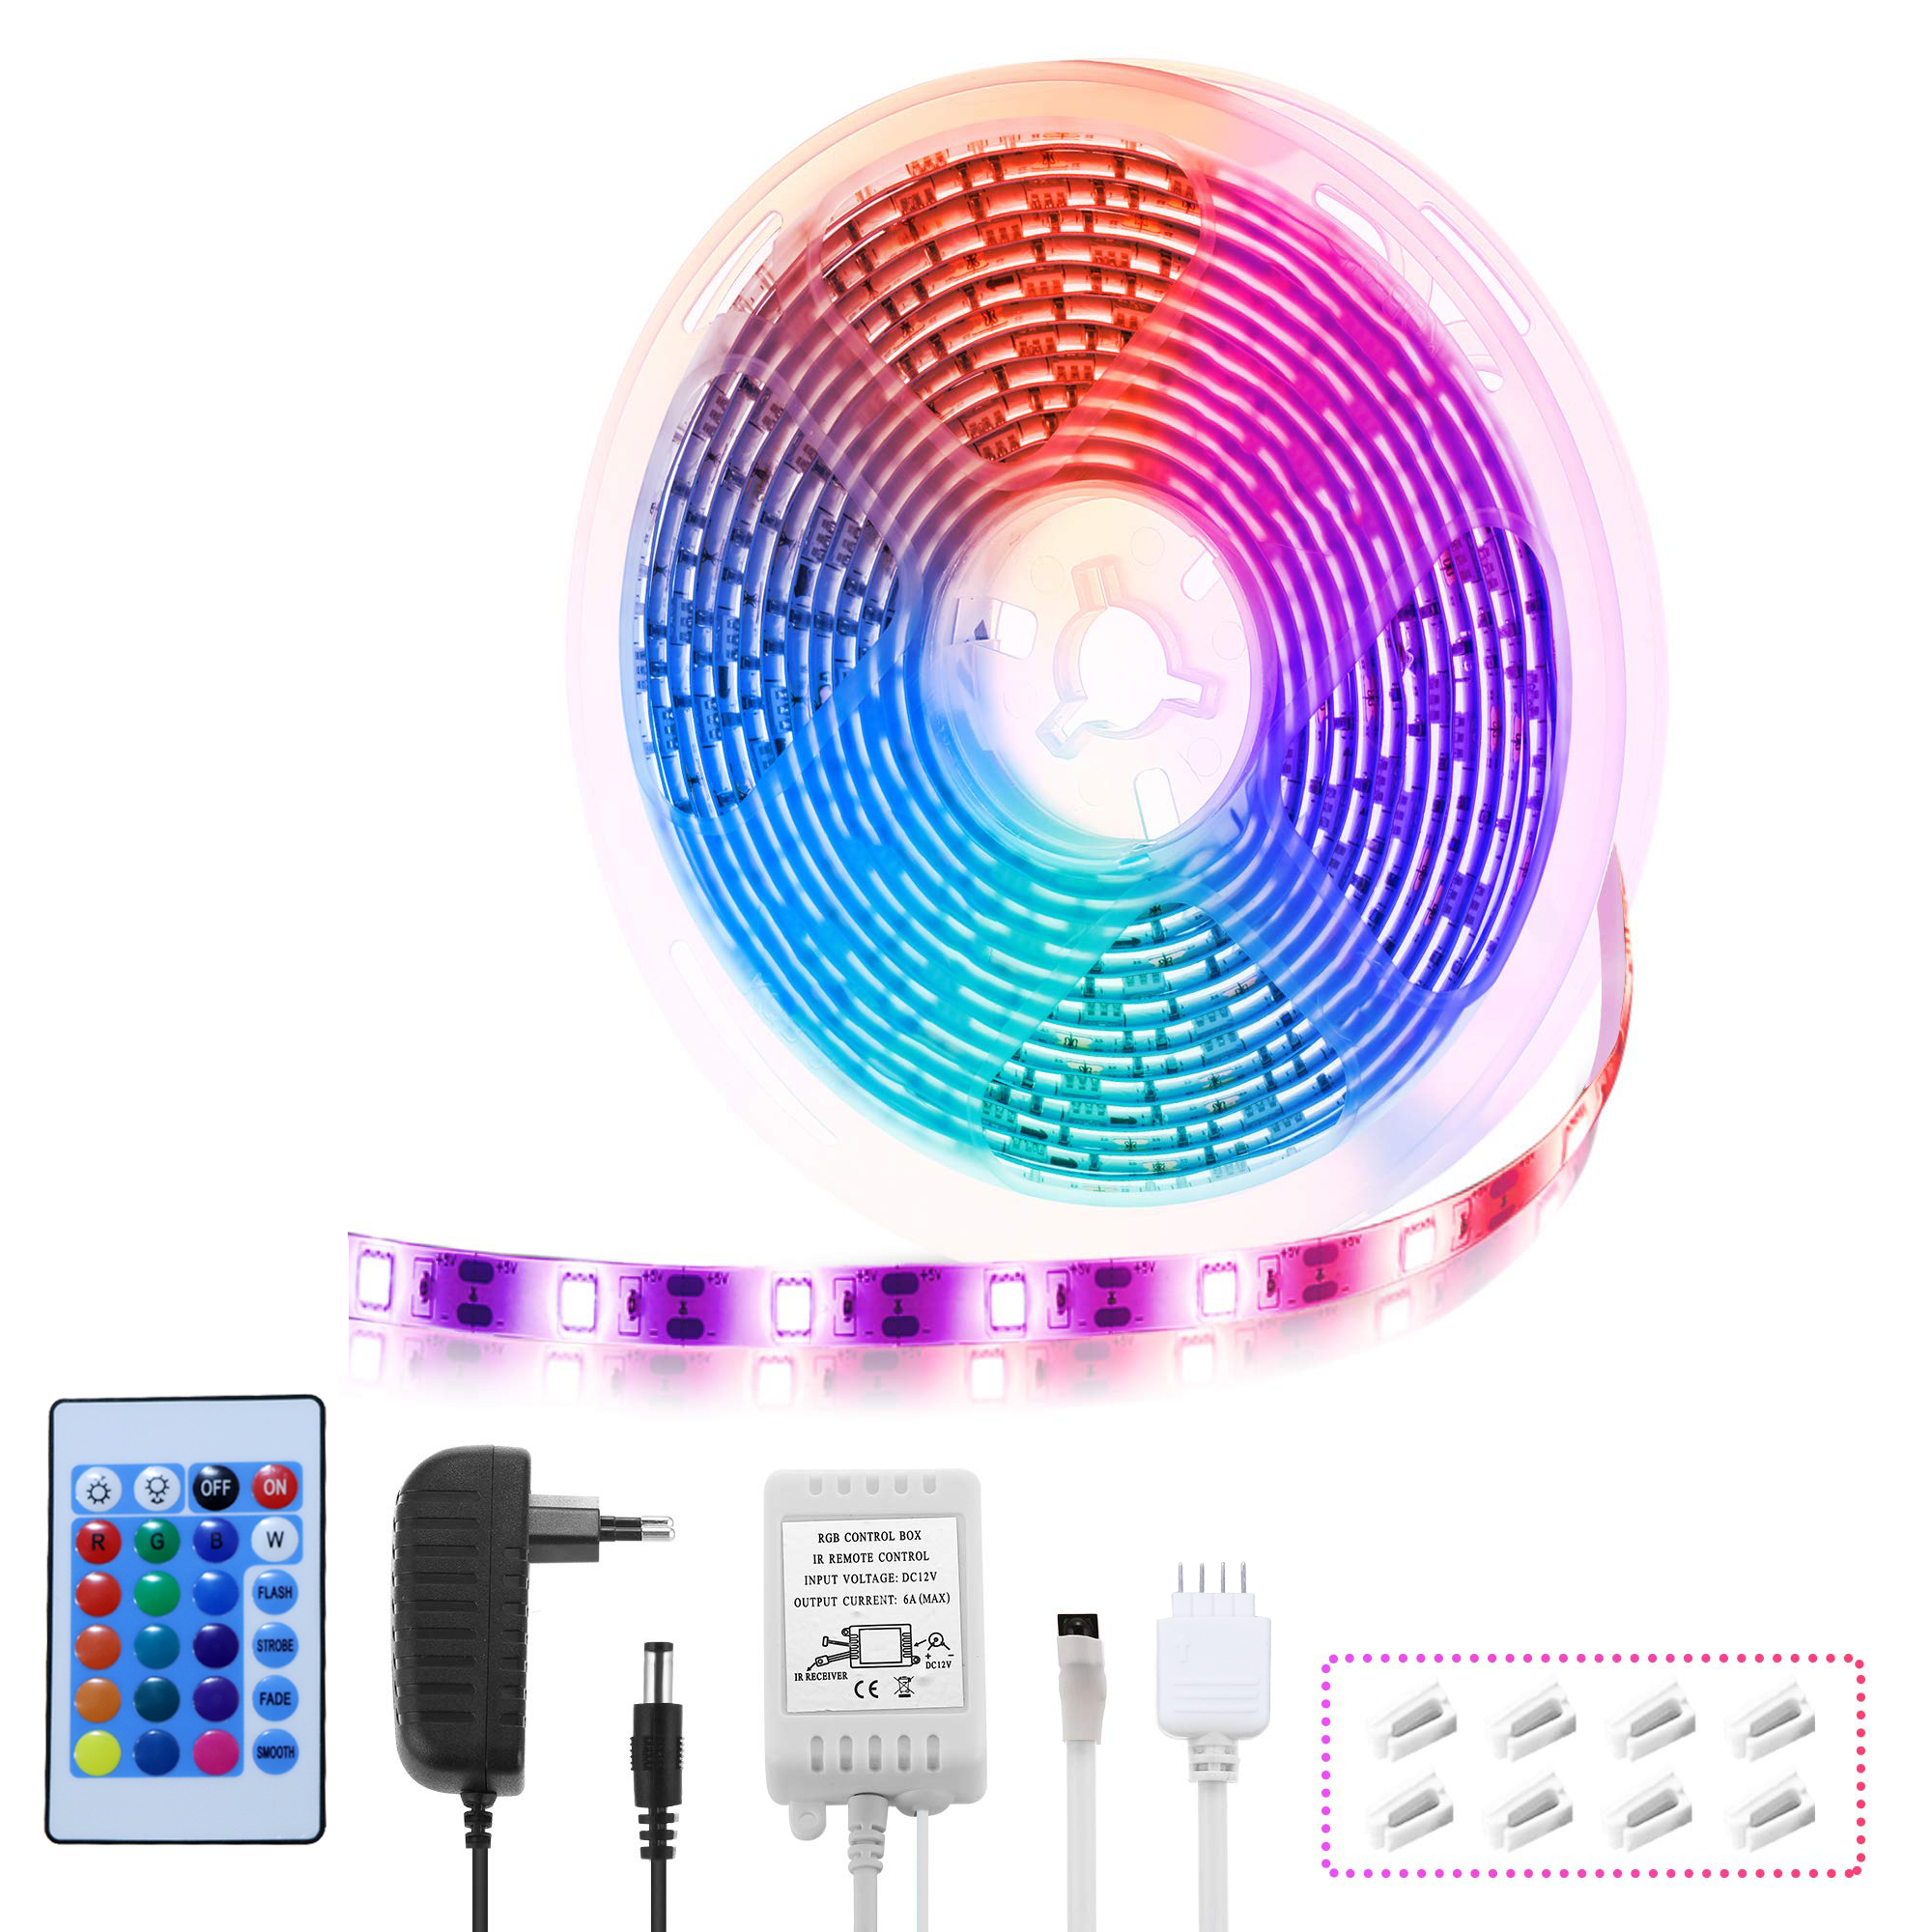 Tospino Led Strip Lights 5M 5050 RGB 150 LEDs Color Changing Lights Strip for Bedroom, Desk, Home Decoration, with 24 Key Remote and 12V Power Supply